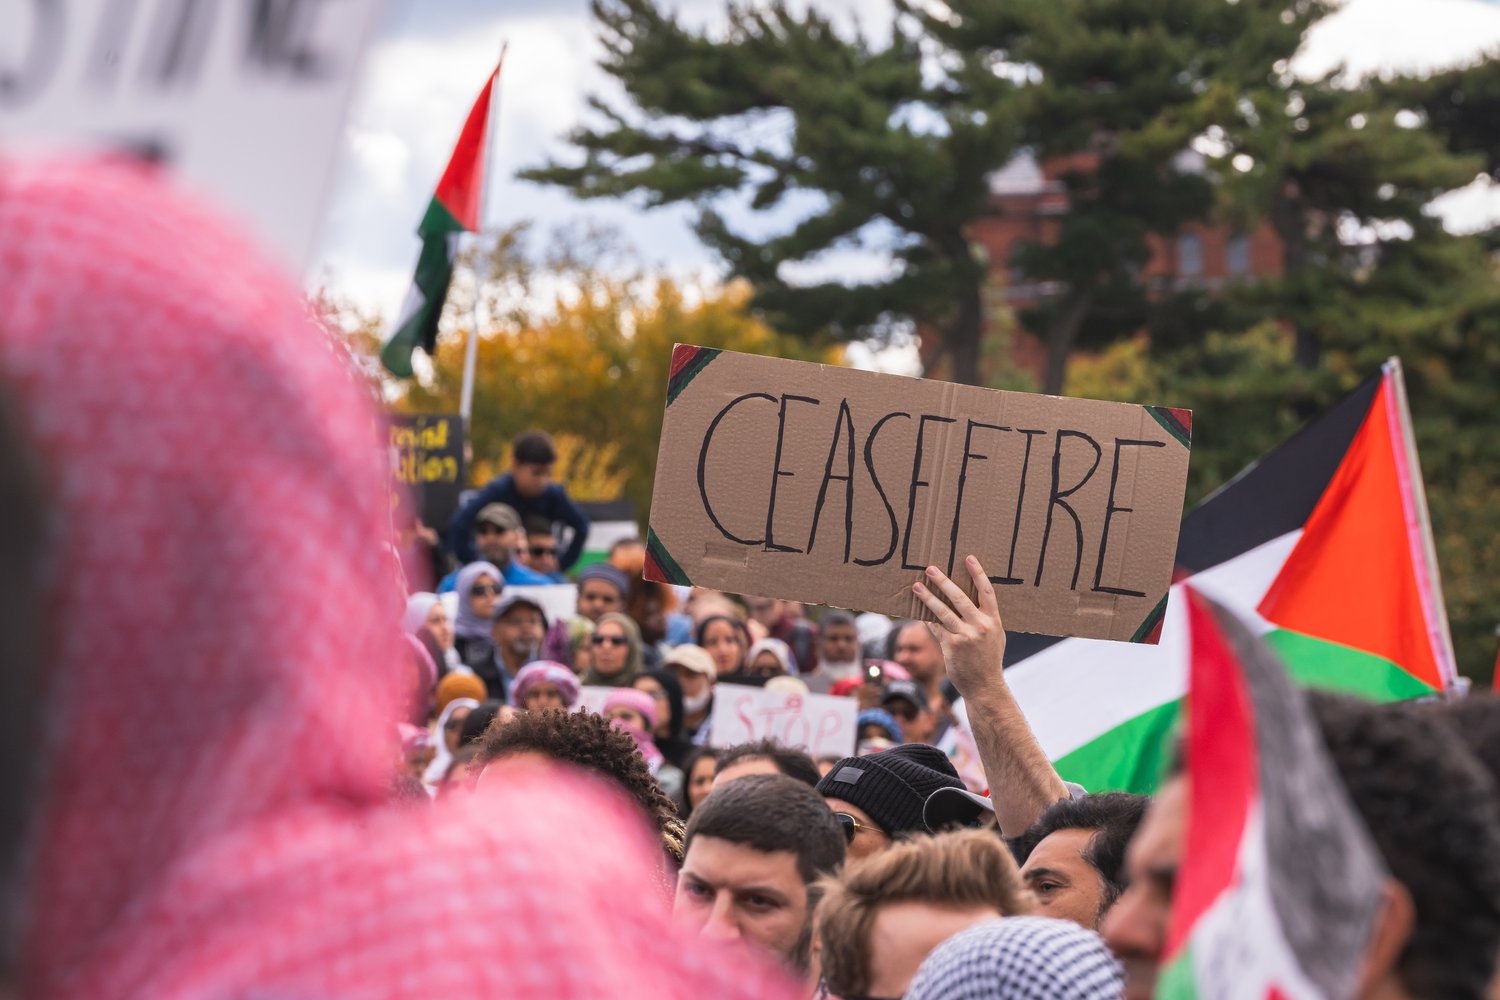 a crowd of people holding Palestinian flag and one sign that reads "CEASEFIRE"